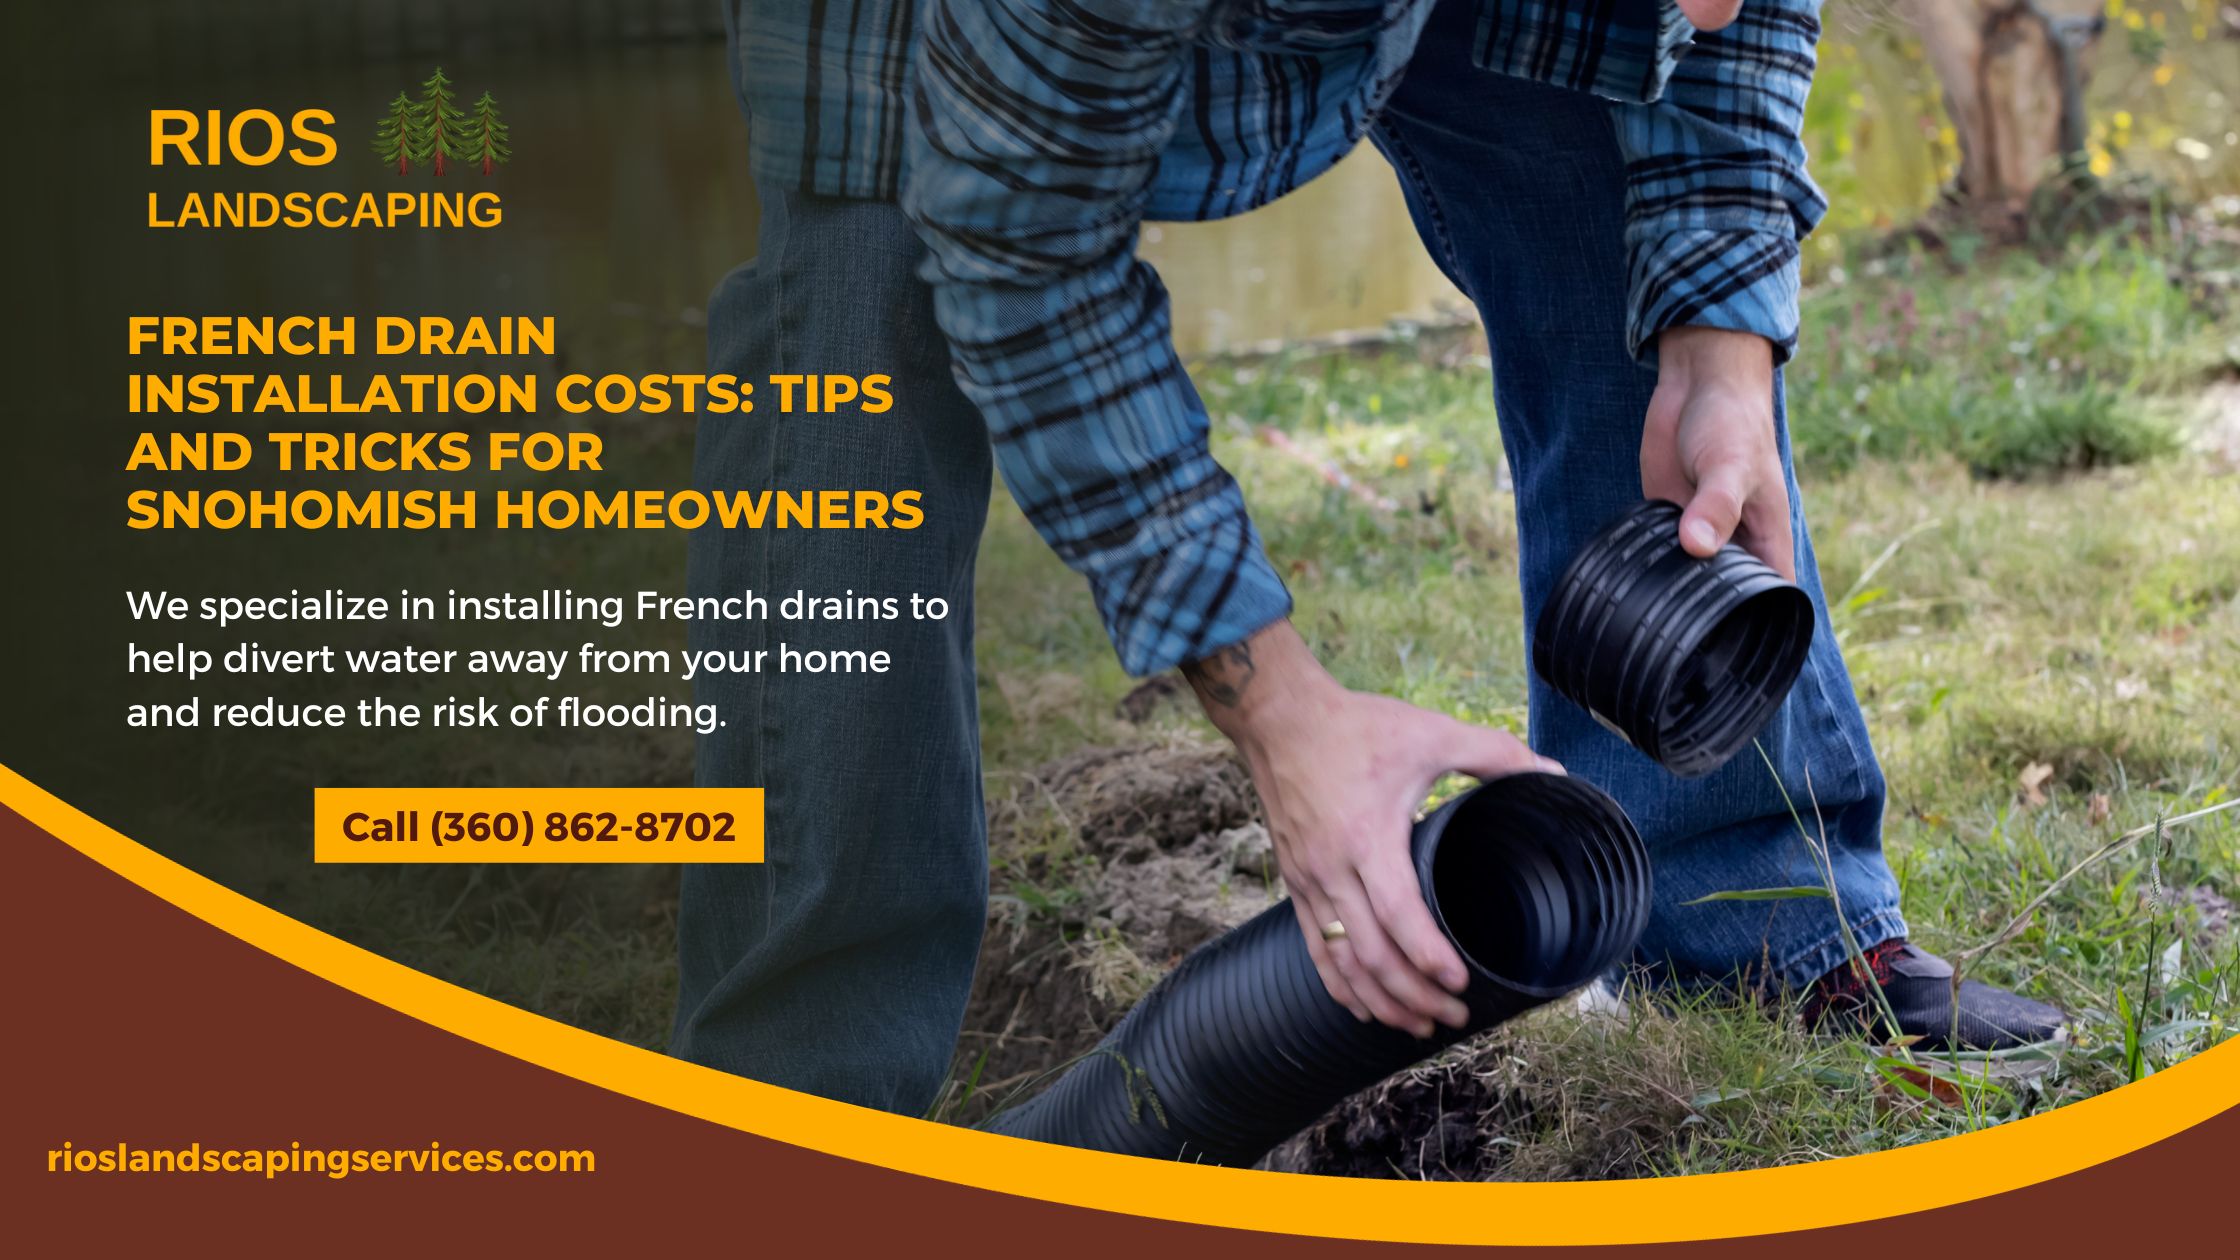 French Drain Installation Costs: Tips and Tricks for Snohomish Homeowners